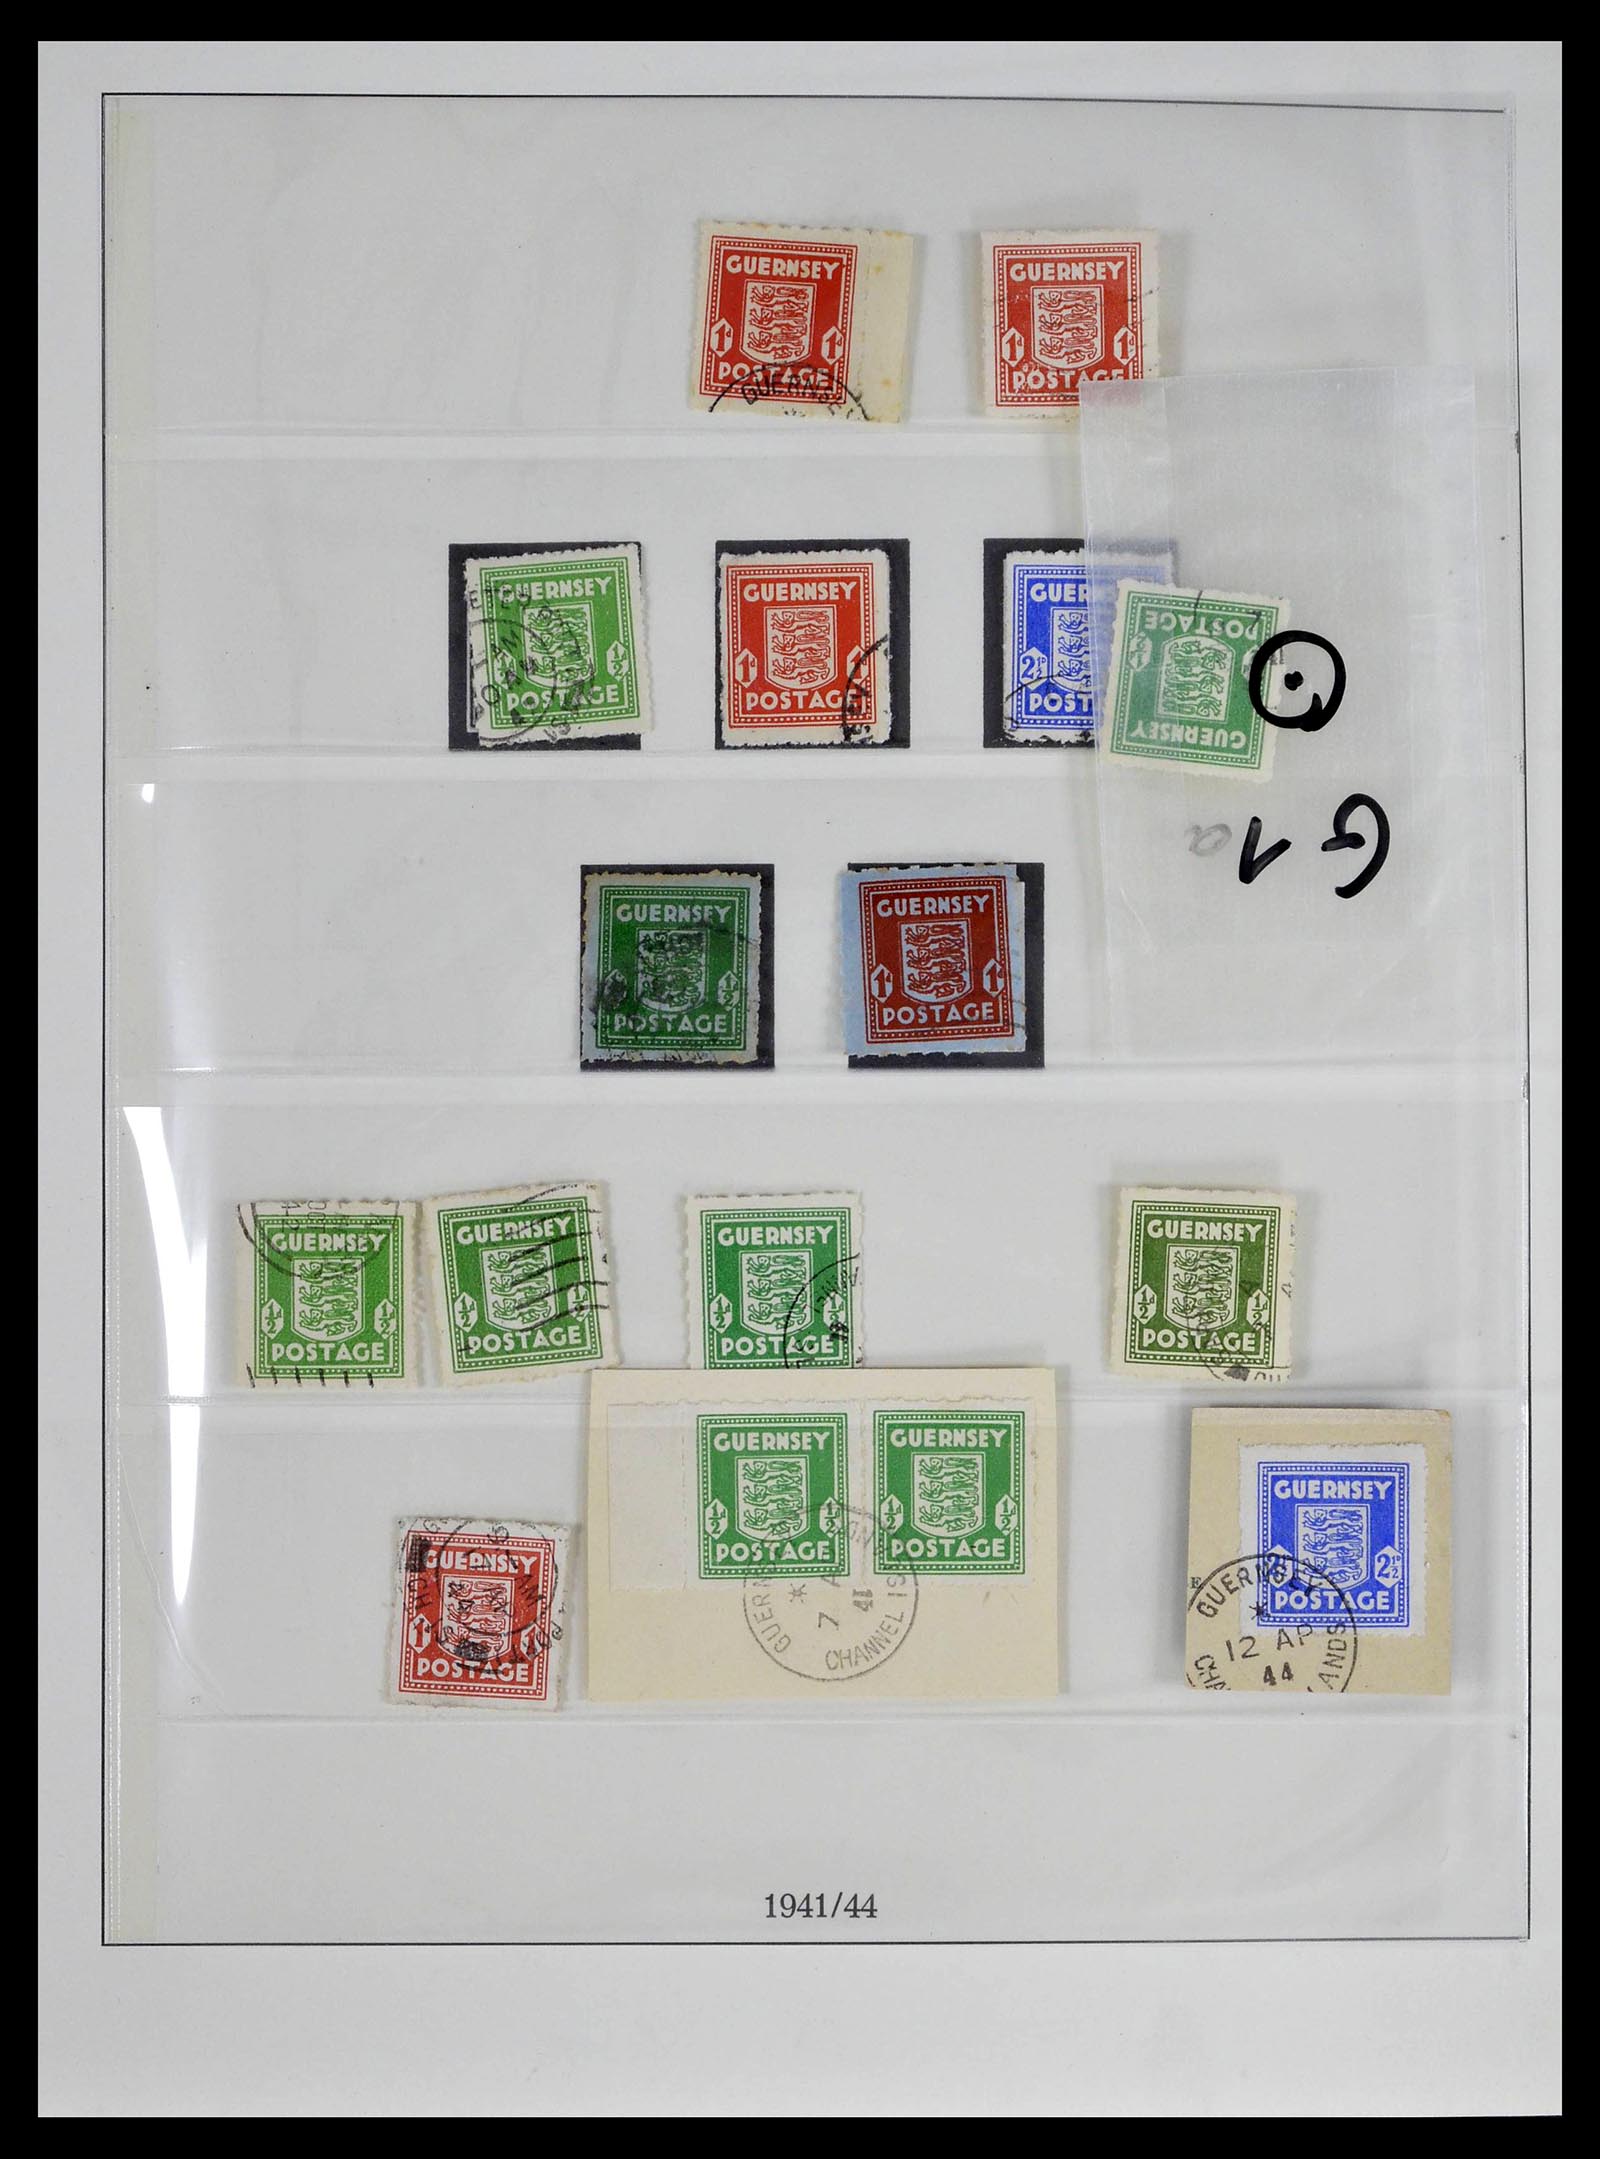 39396 0001 - Stamp collection 39396 German occupation WW II 1939-1945.